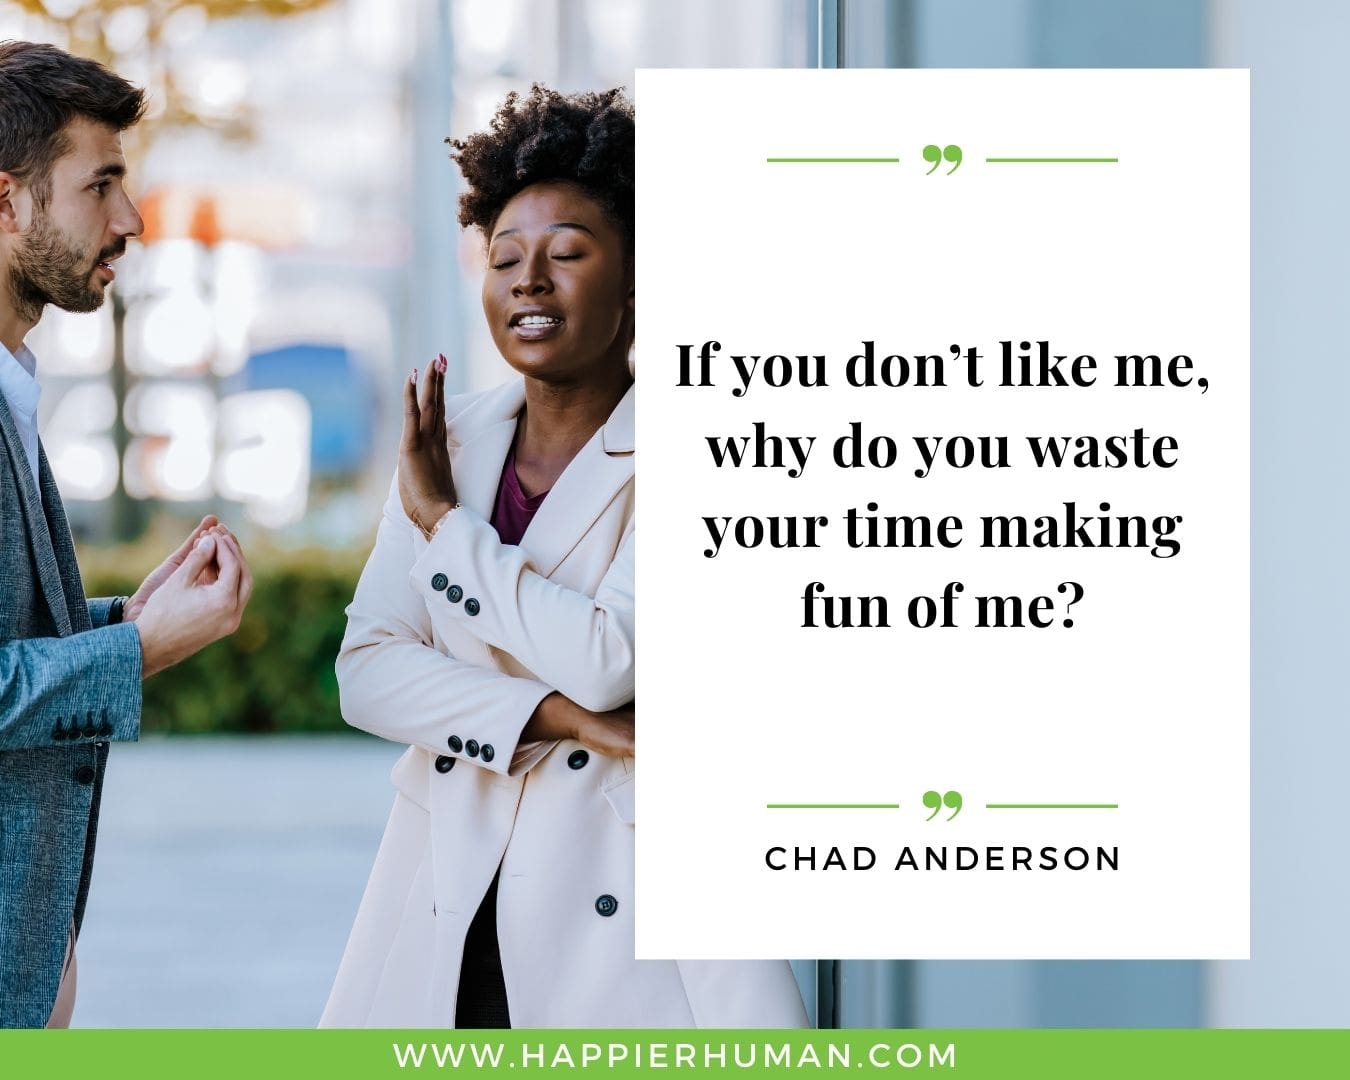 Haters Quotes - “If you don’t like me, why do you waste your time making fun of me?” - Chad Anderson